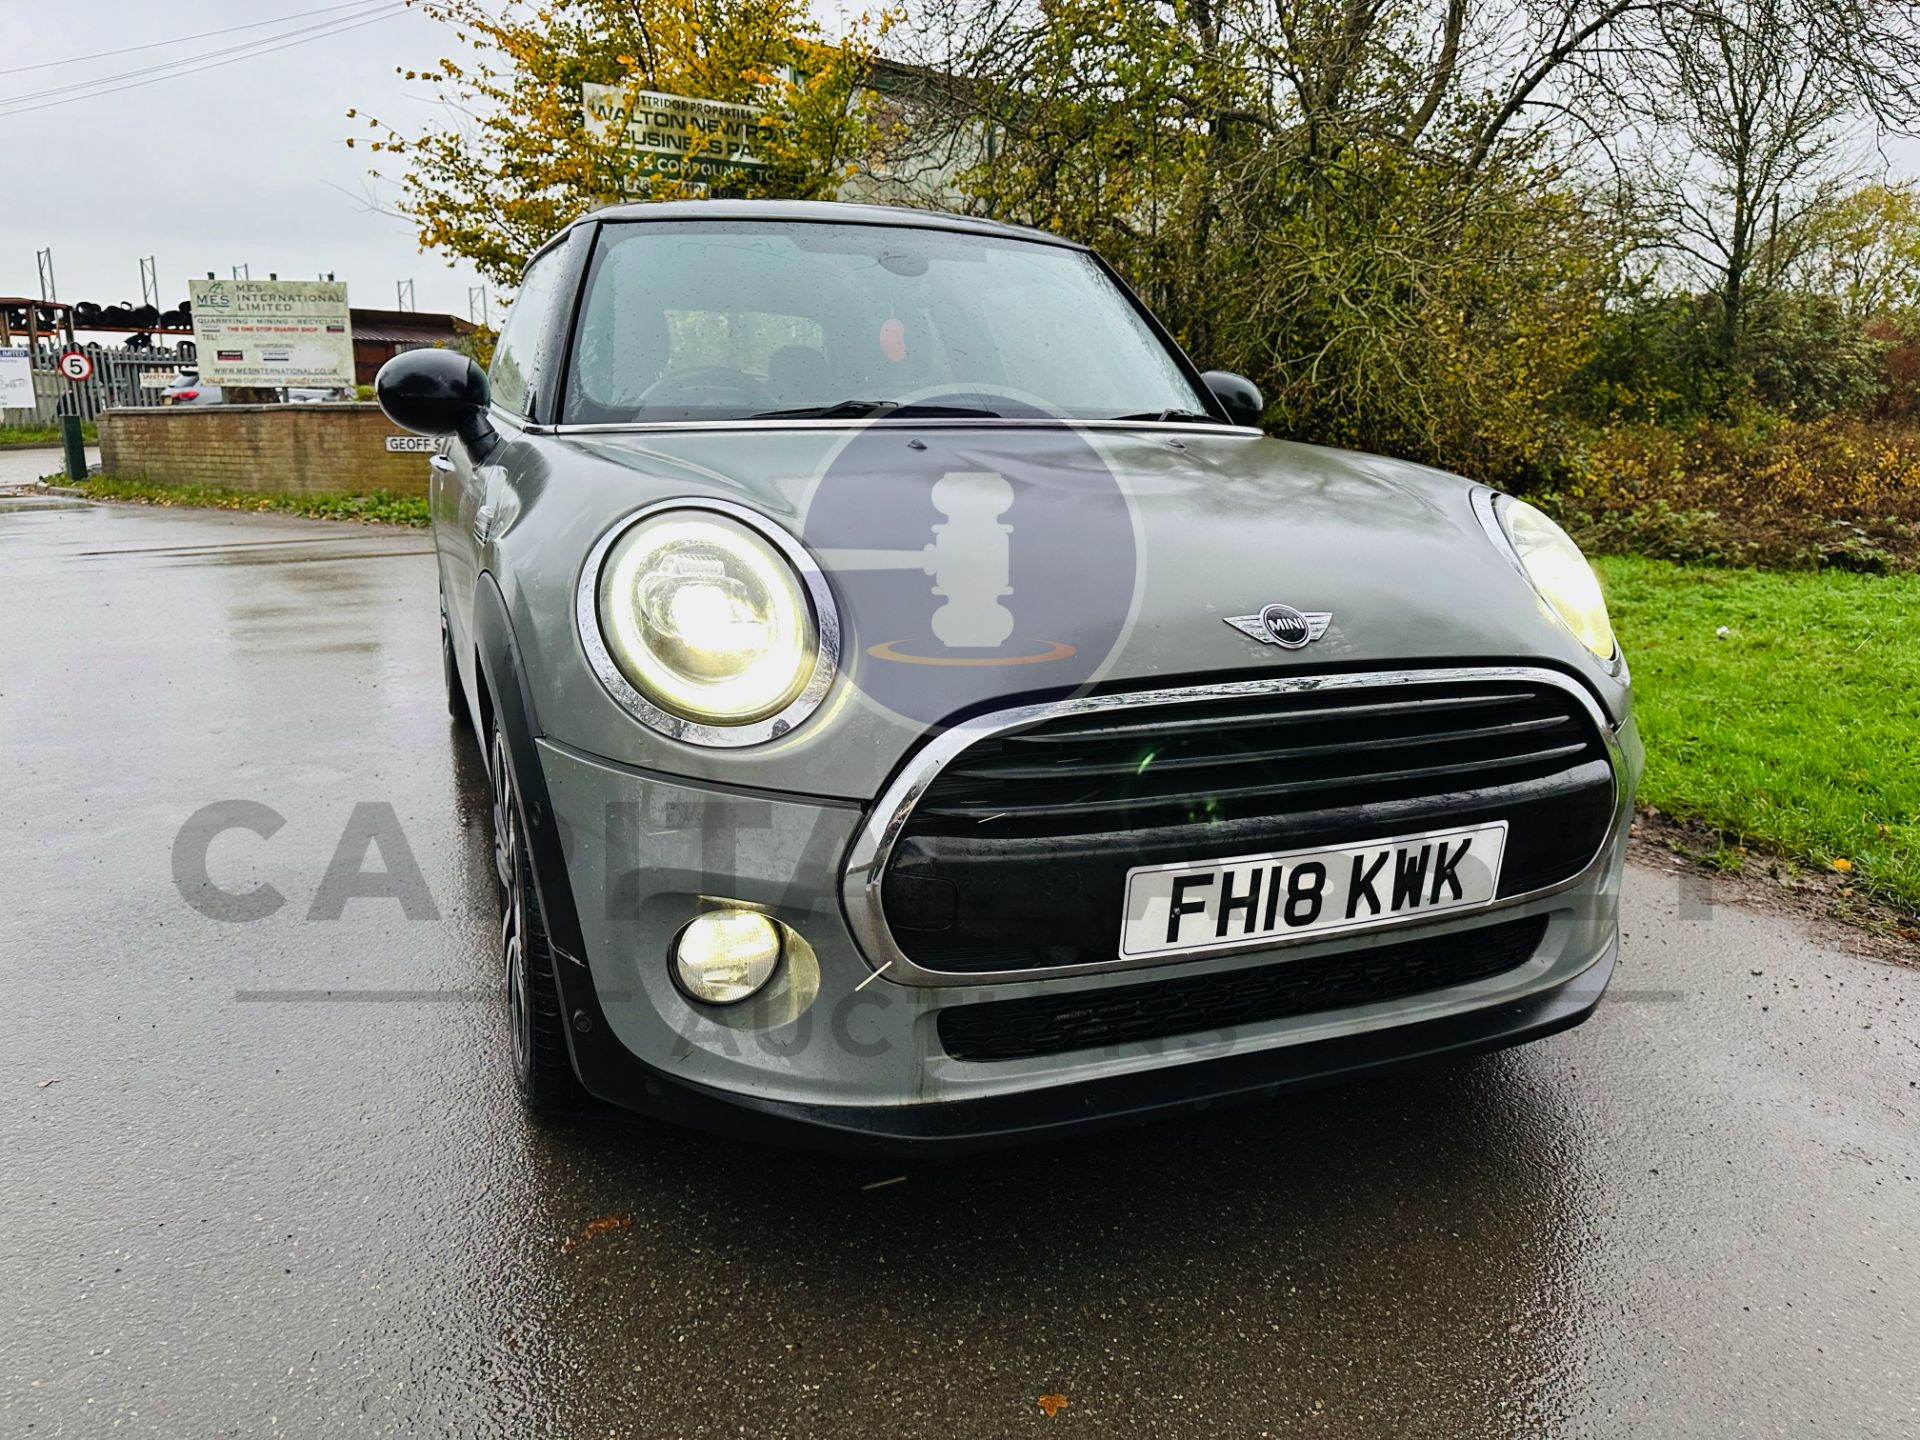 (ON SALE) MINI ONE 1.5 PETROL (18 REG) - START / STOP -AIR CONDITIONING -ONLY 35K MILES - NO VAT! - Image 3 of 39